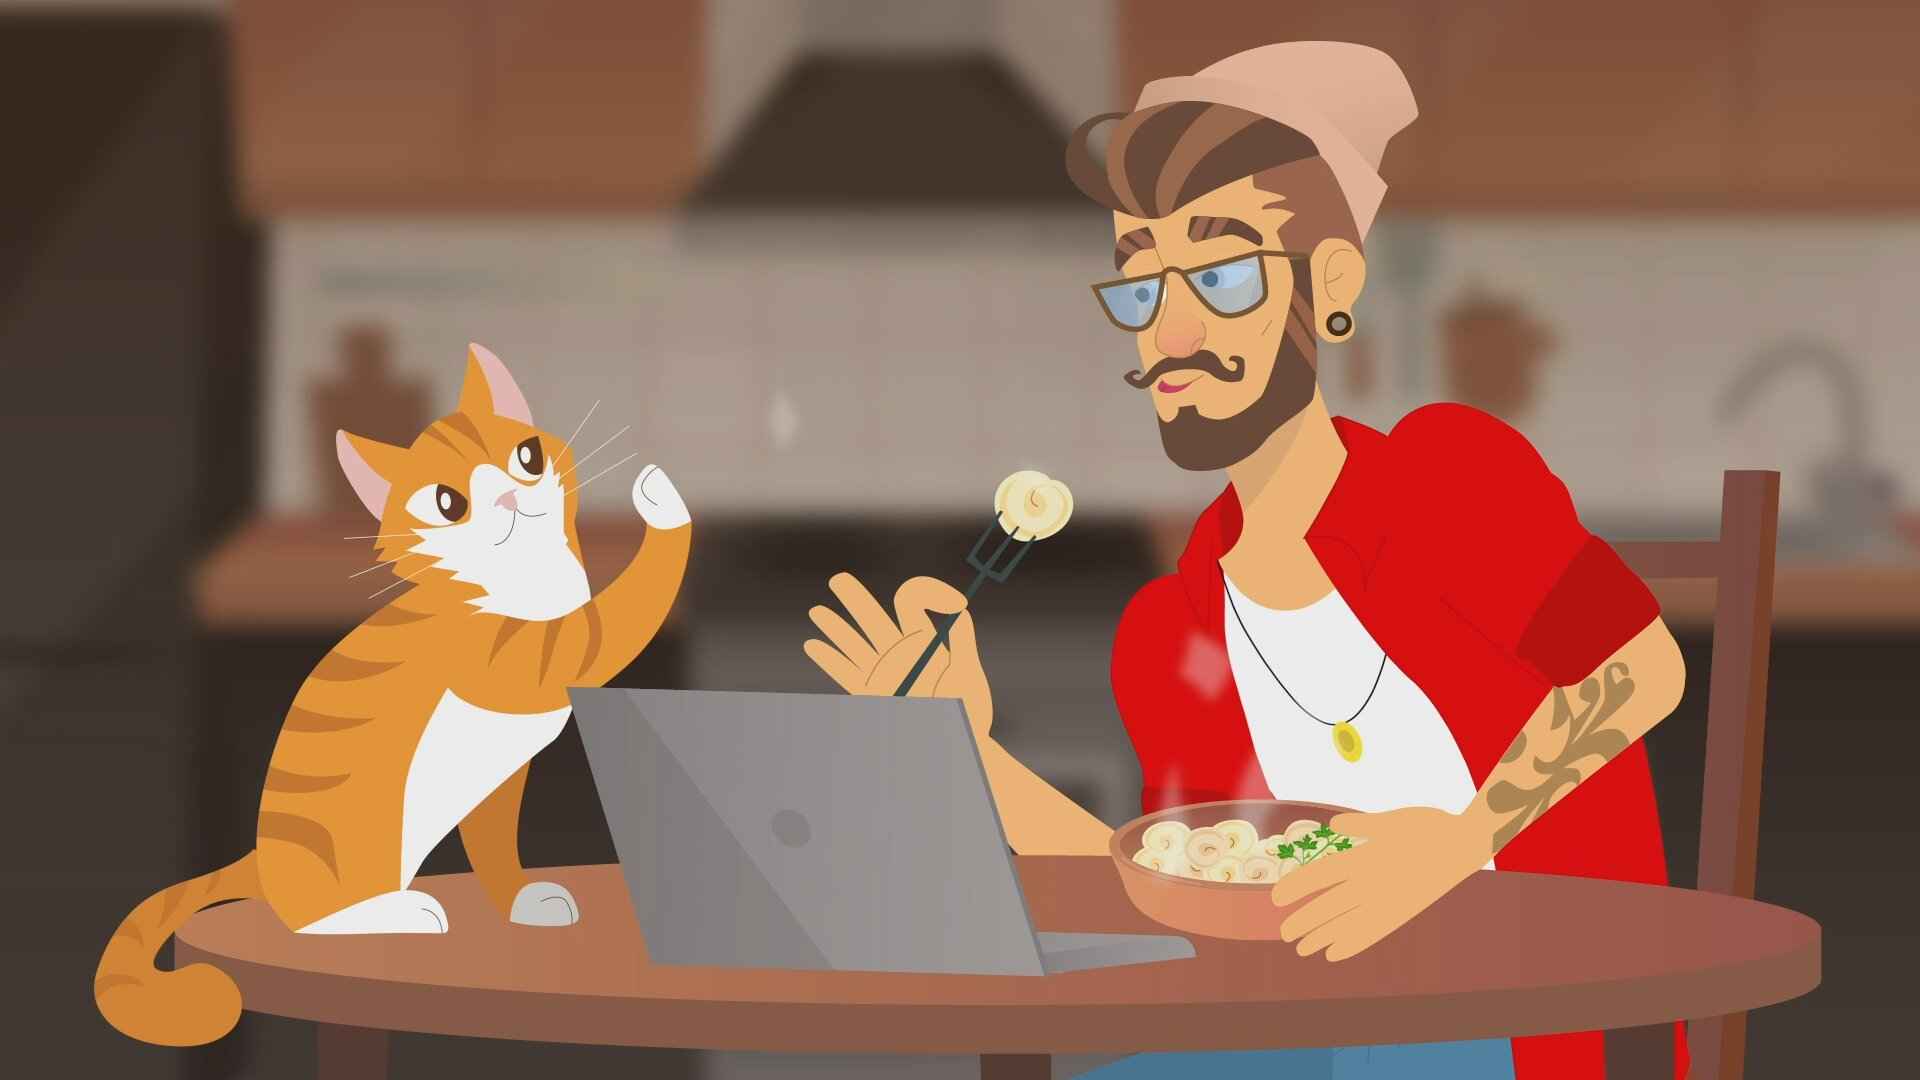 TV Animated Advertising Video "Don't waste time cooking!"